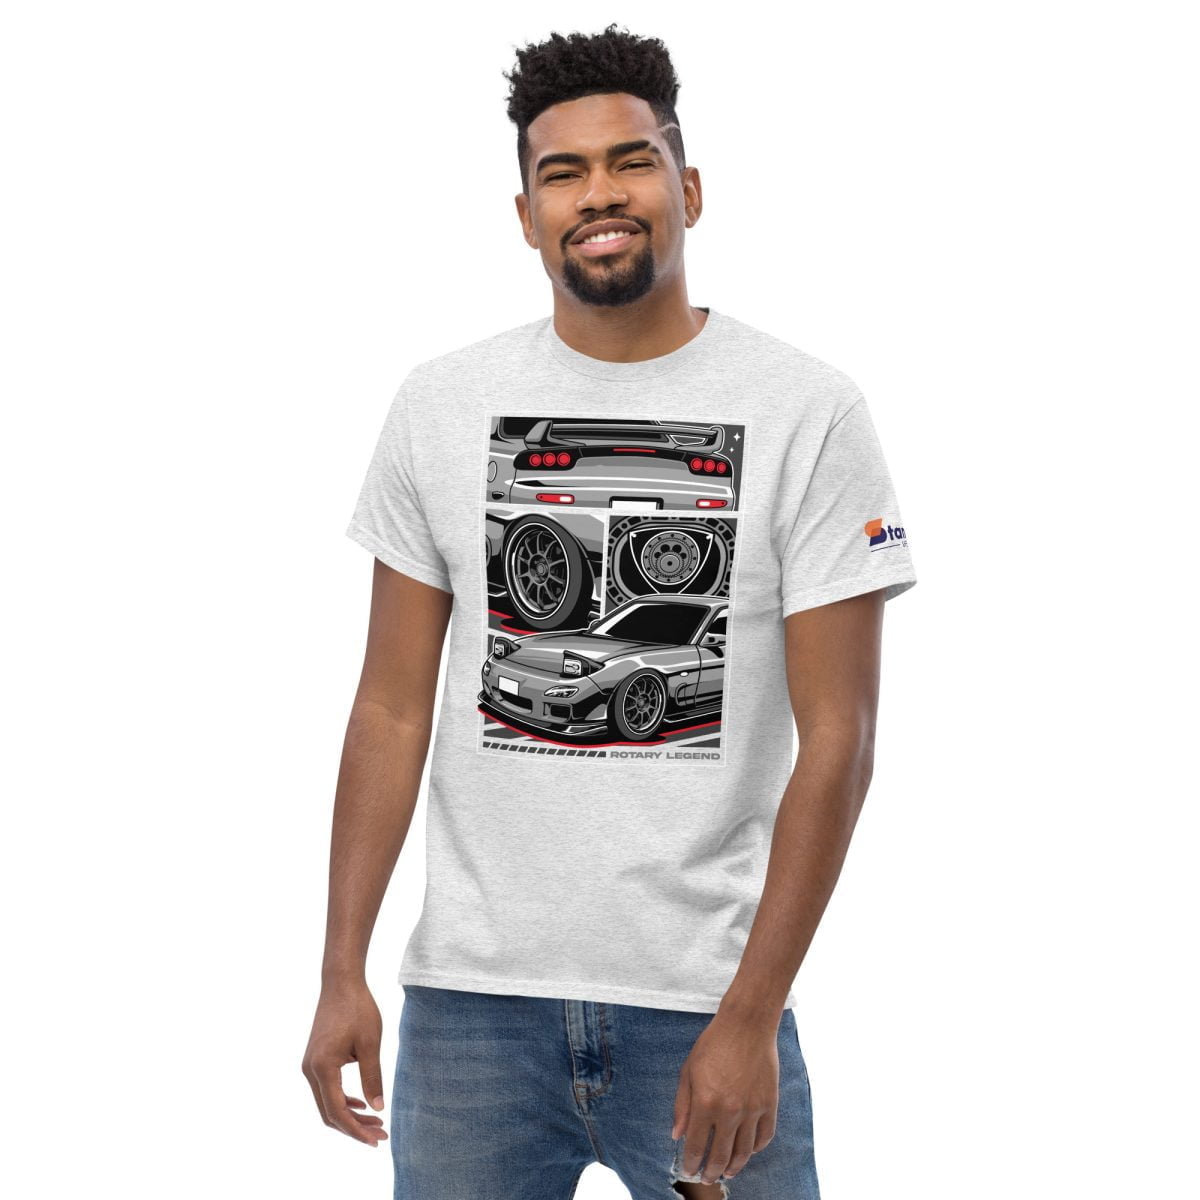 A man wearing a 3rd Gen Mazda RX 7 Rotary Legend Mens Classic T shirt with an image of a Mazda RX 7 race car | StancedLife